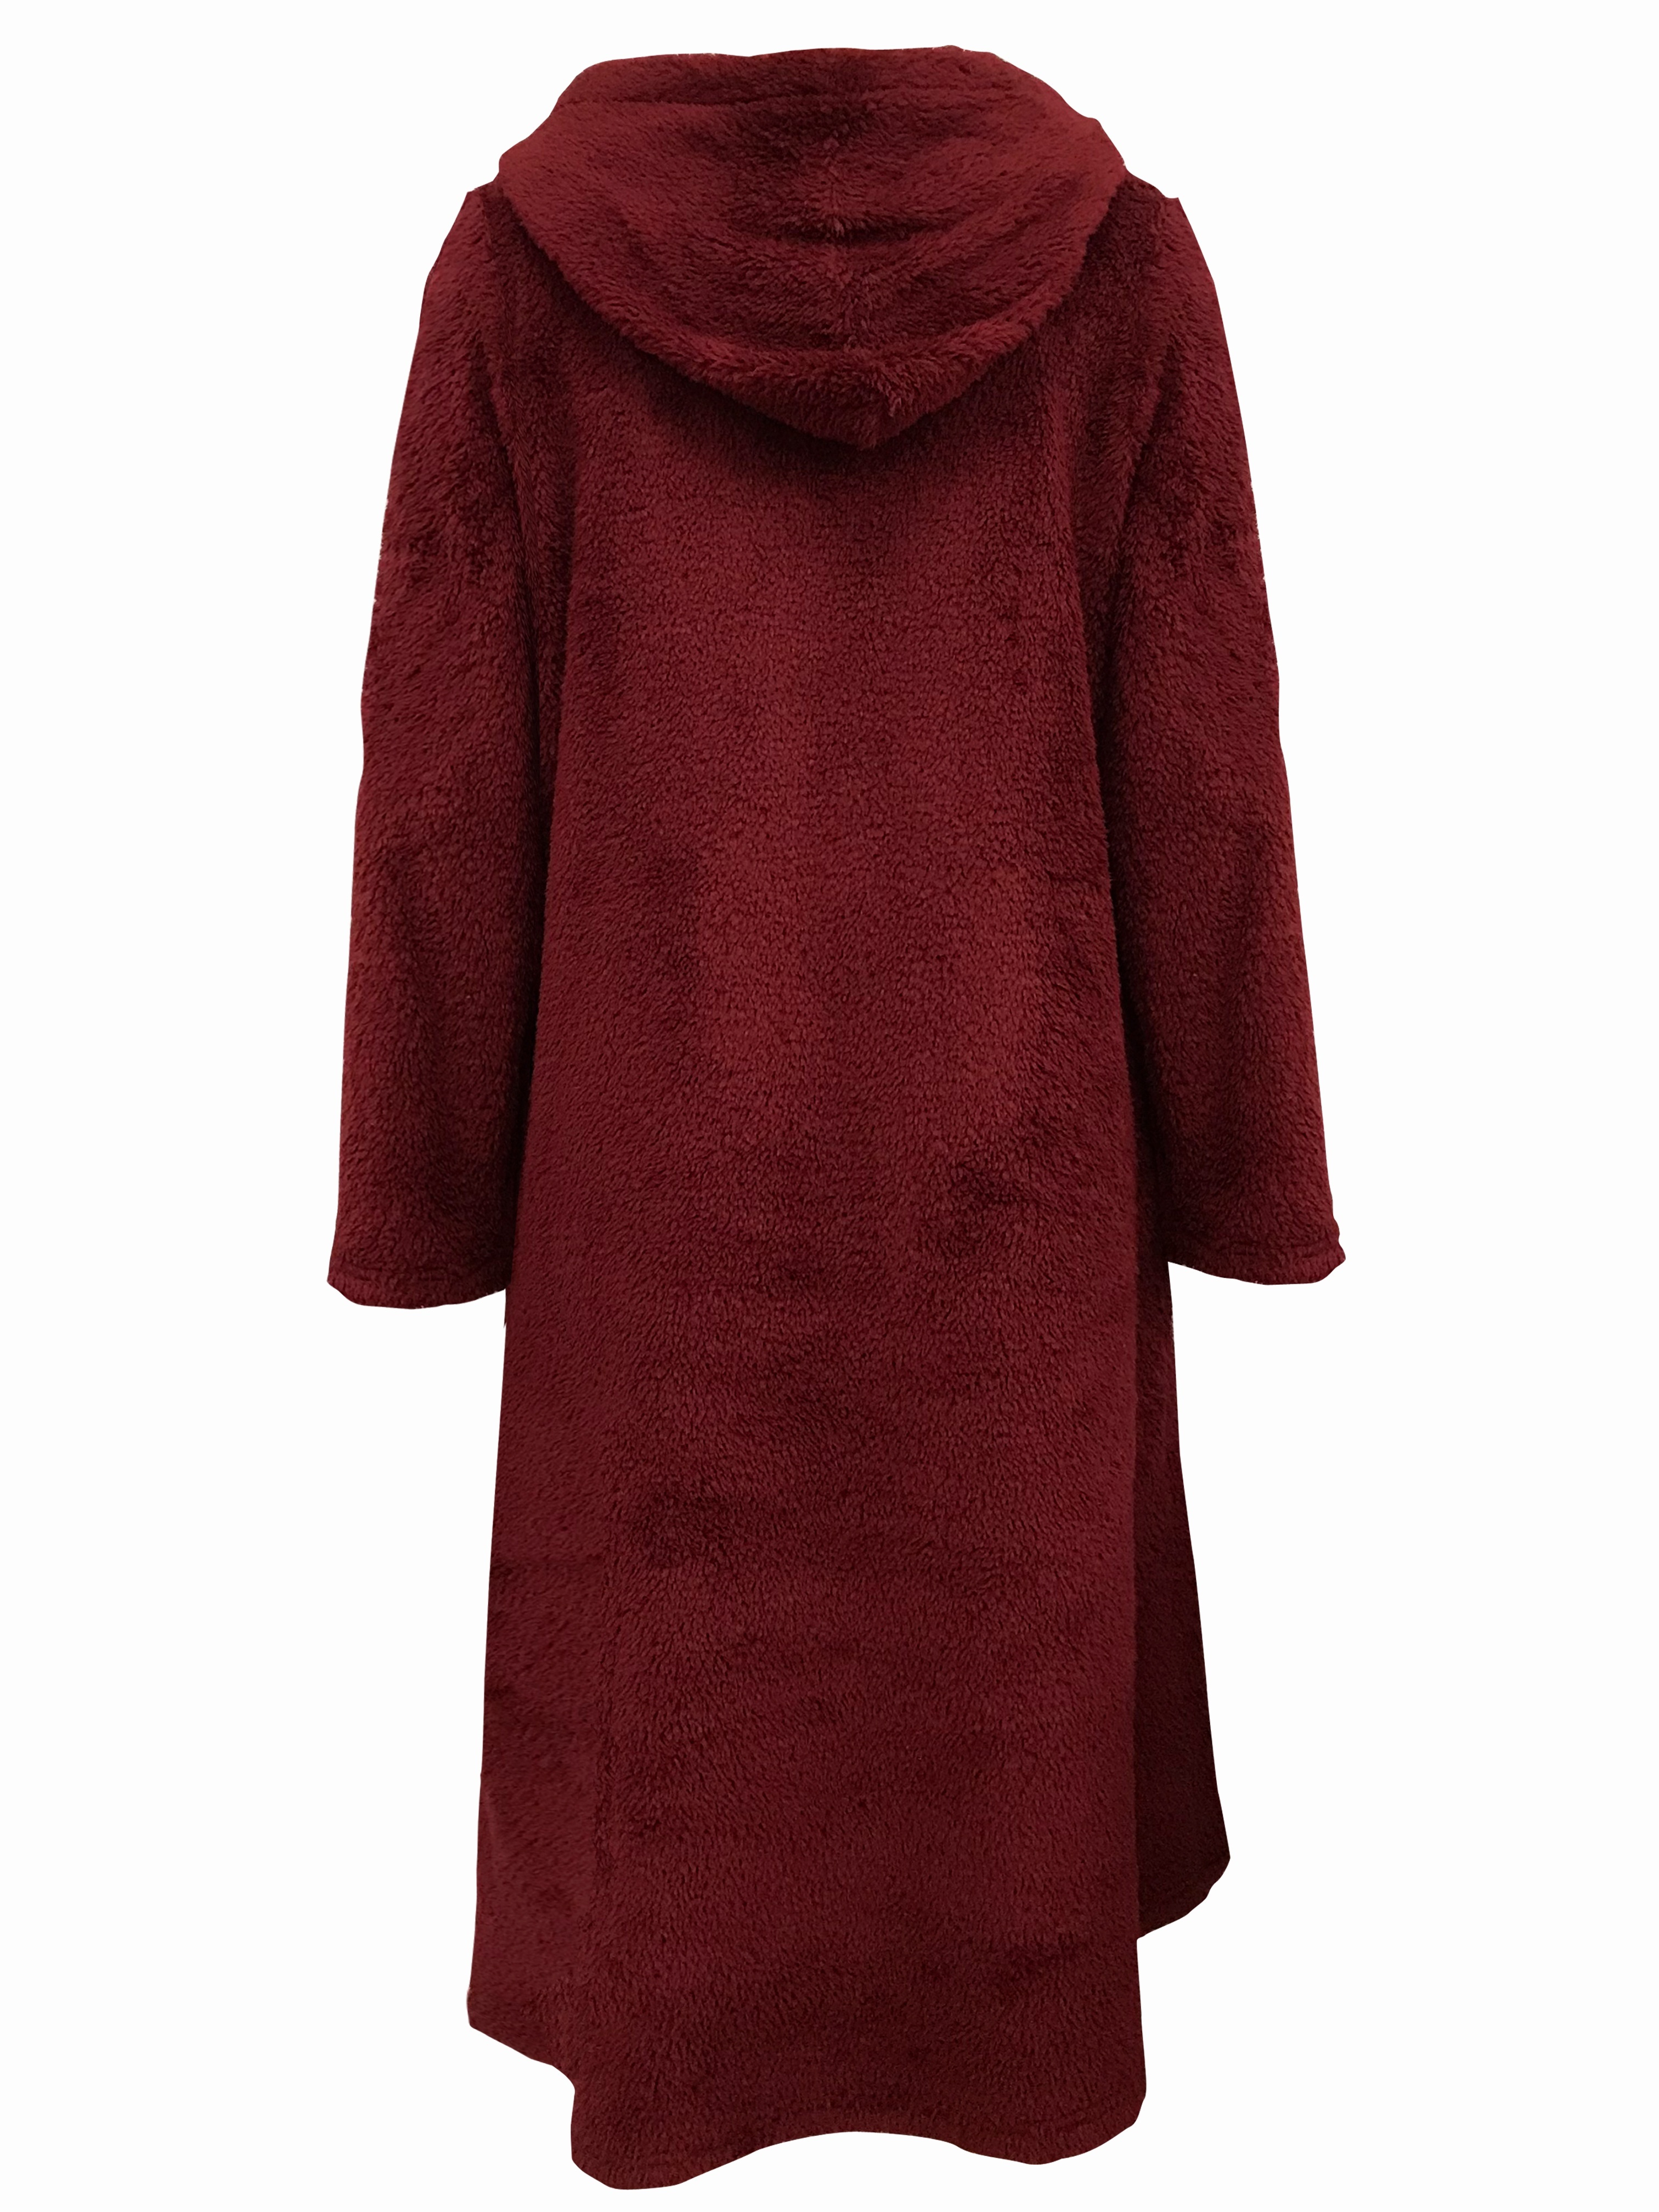 teddy hooded dress casual long sleeve winter warm dress womens clothing details 1